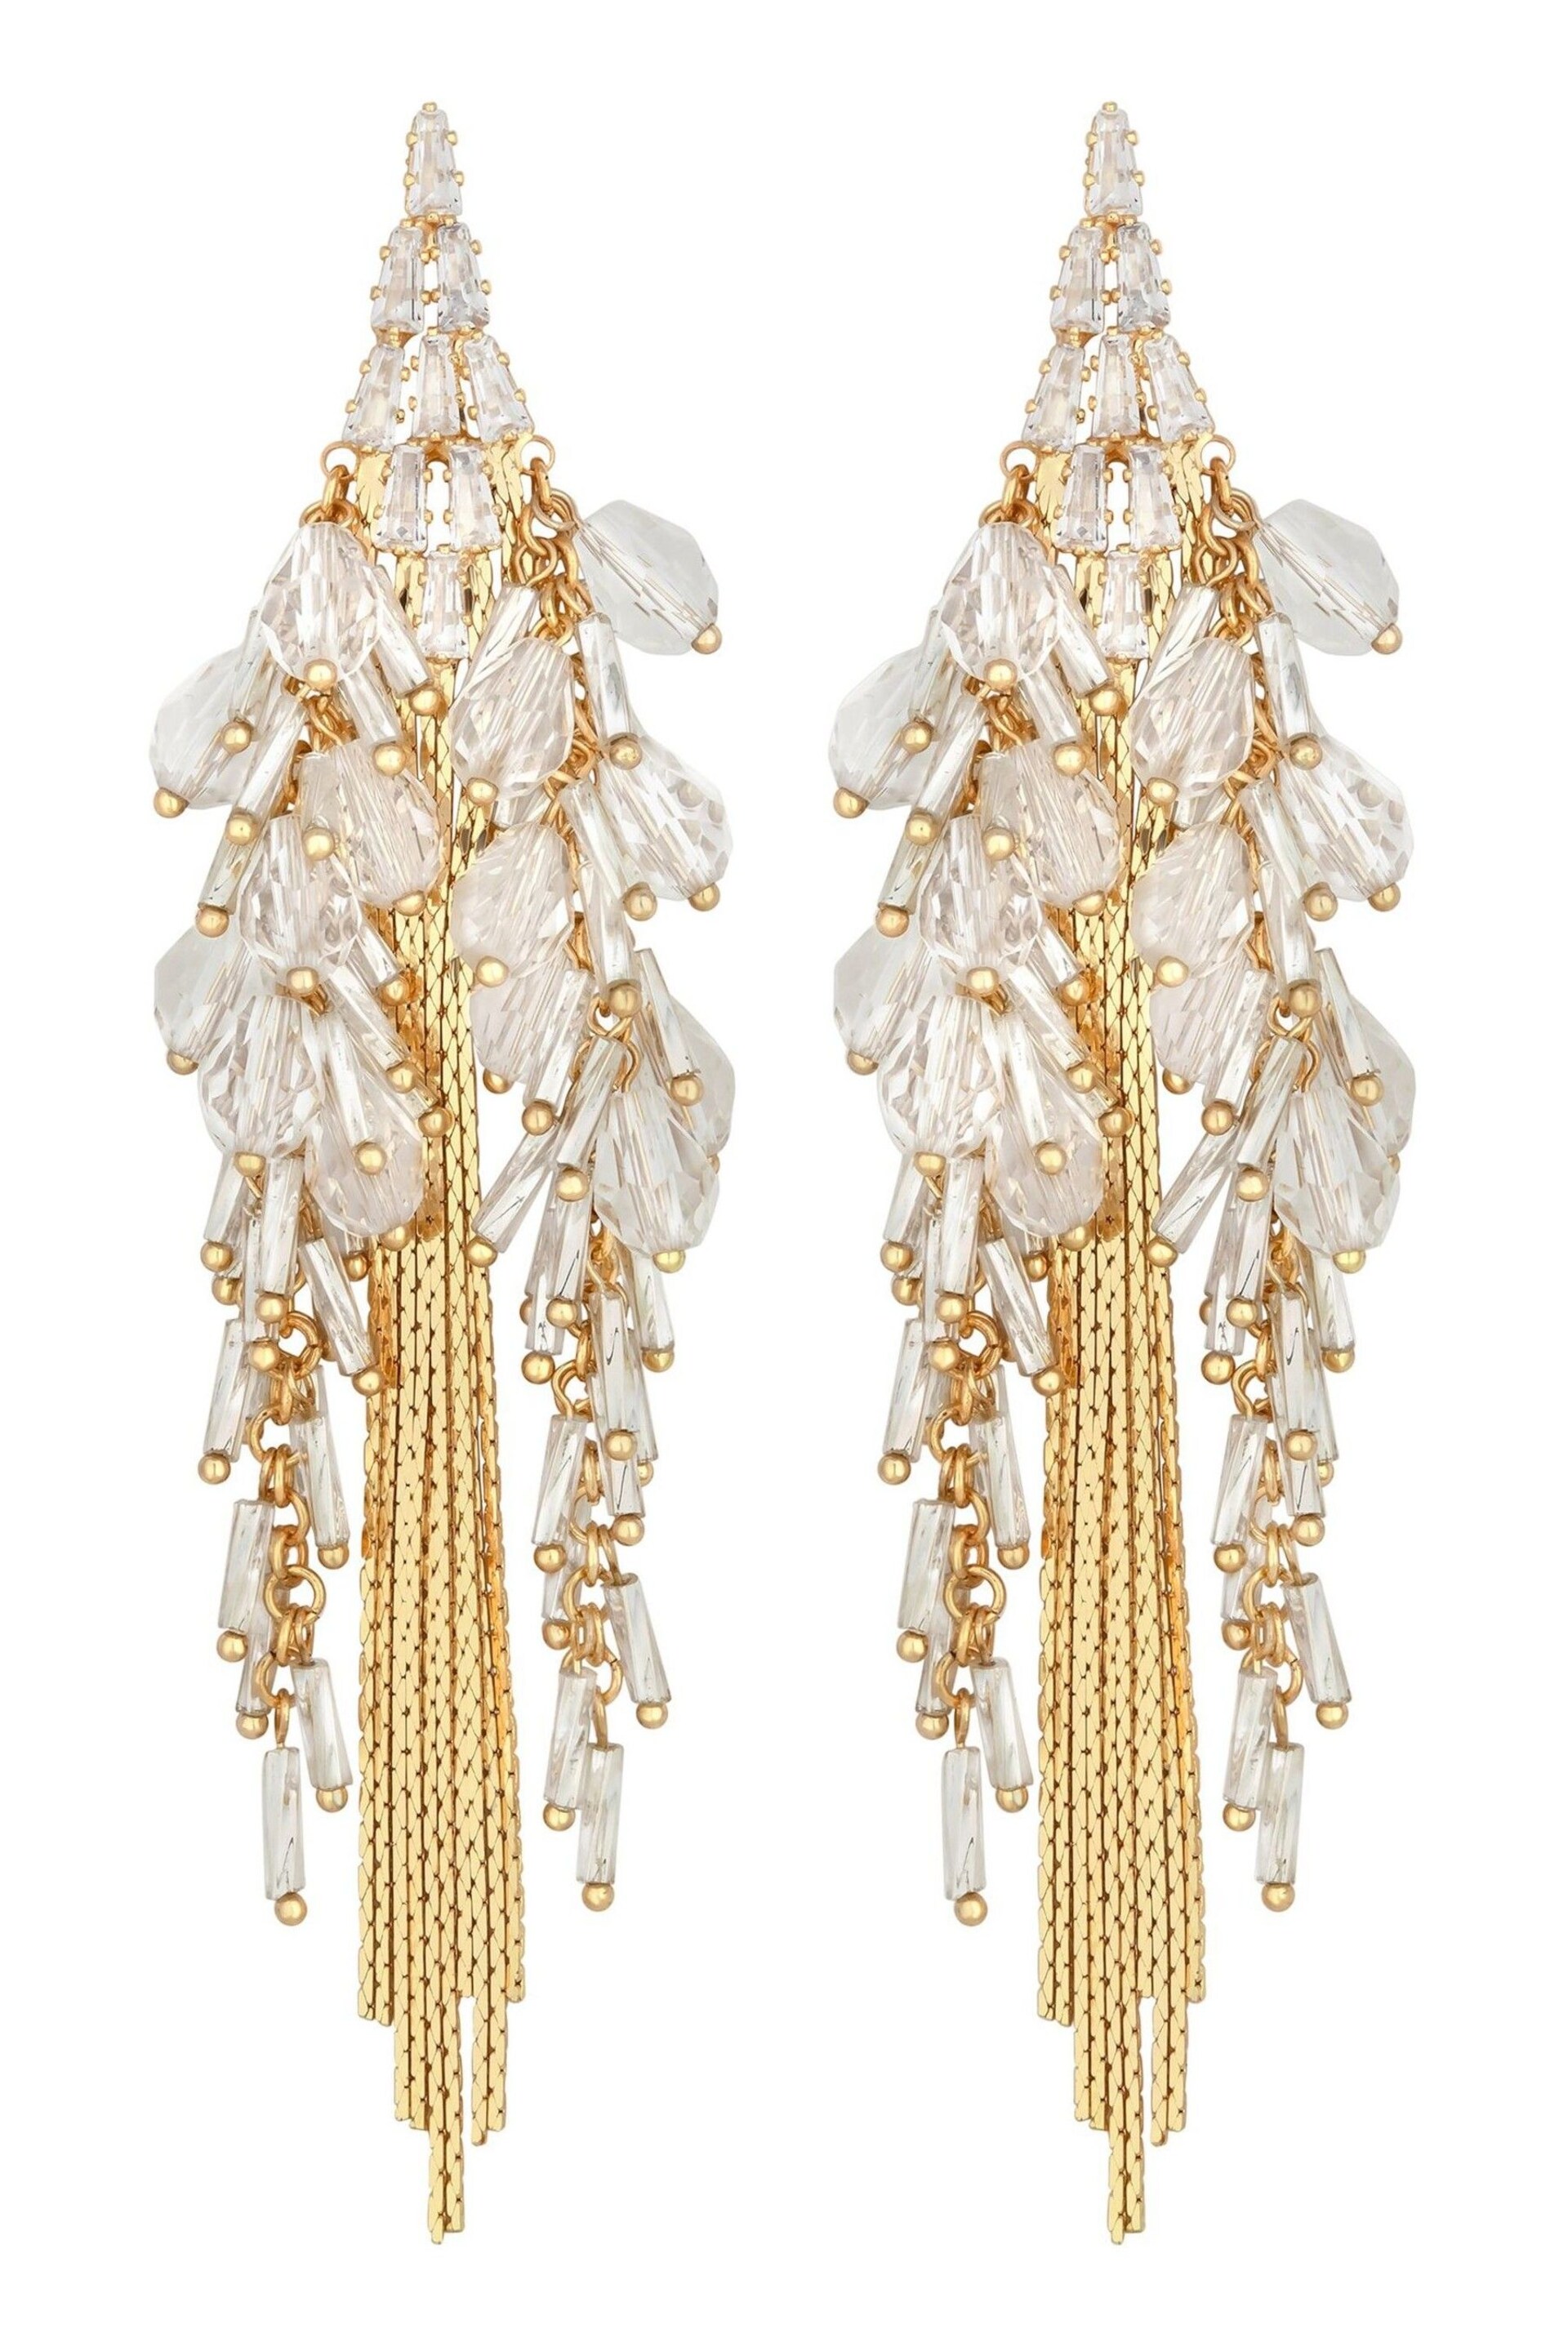 Jon Richard Gold Statement Faceted Bead Linear Earrings - Image 2 of 2